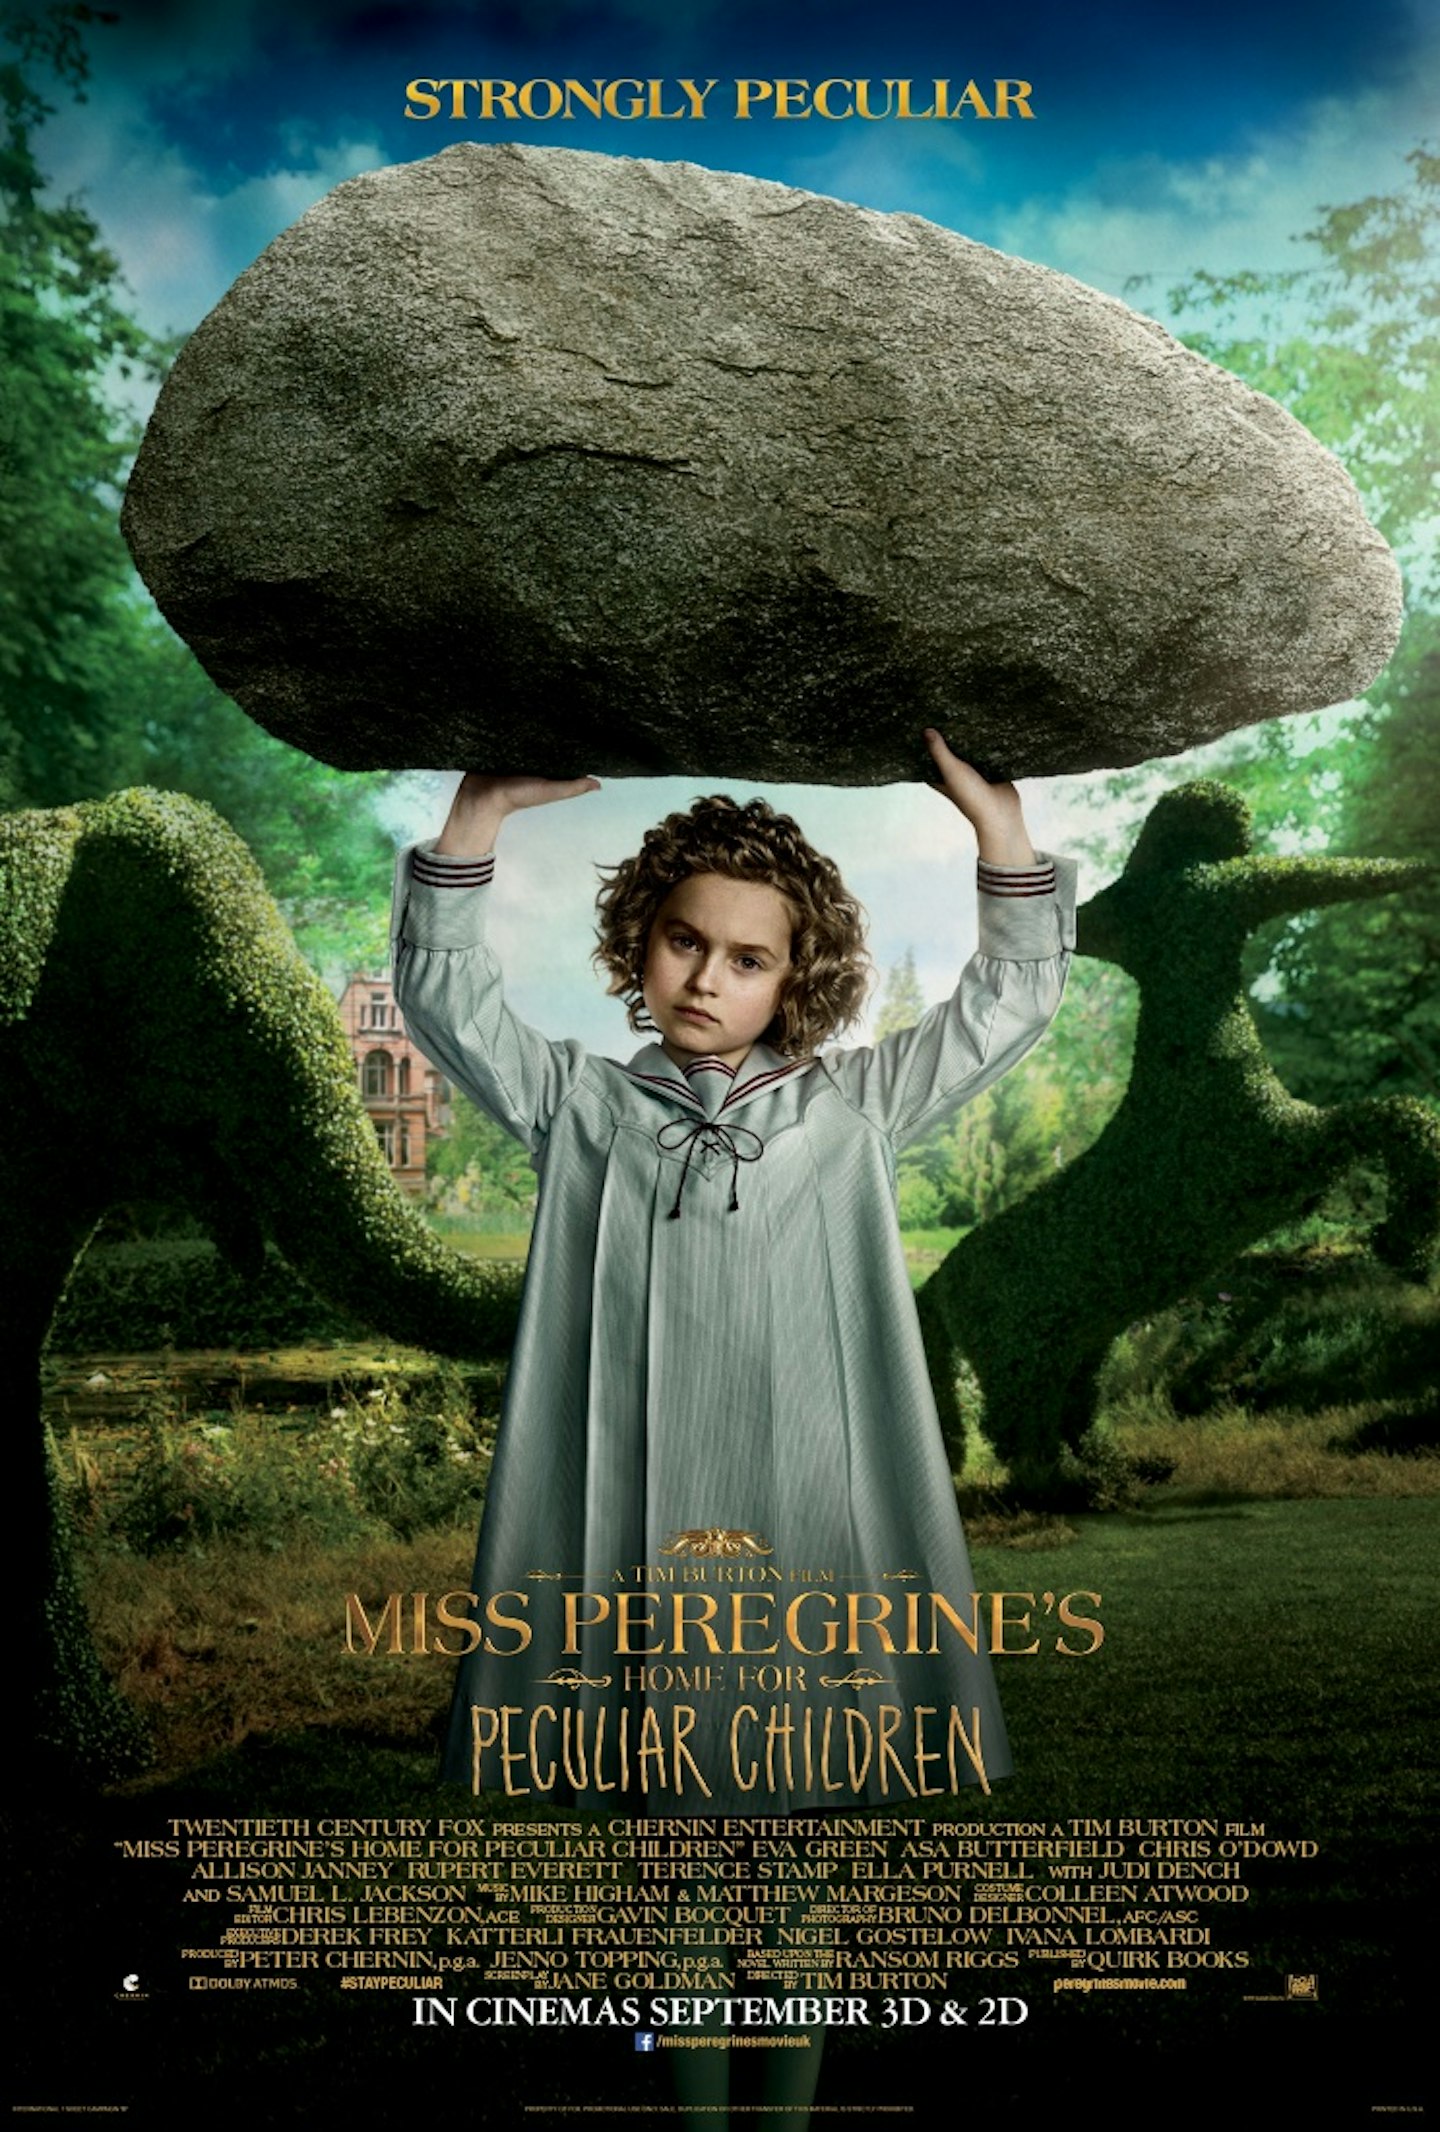 Miss Peregrine's Home for Peculiar Children characters posters